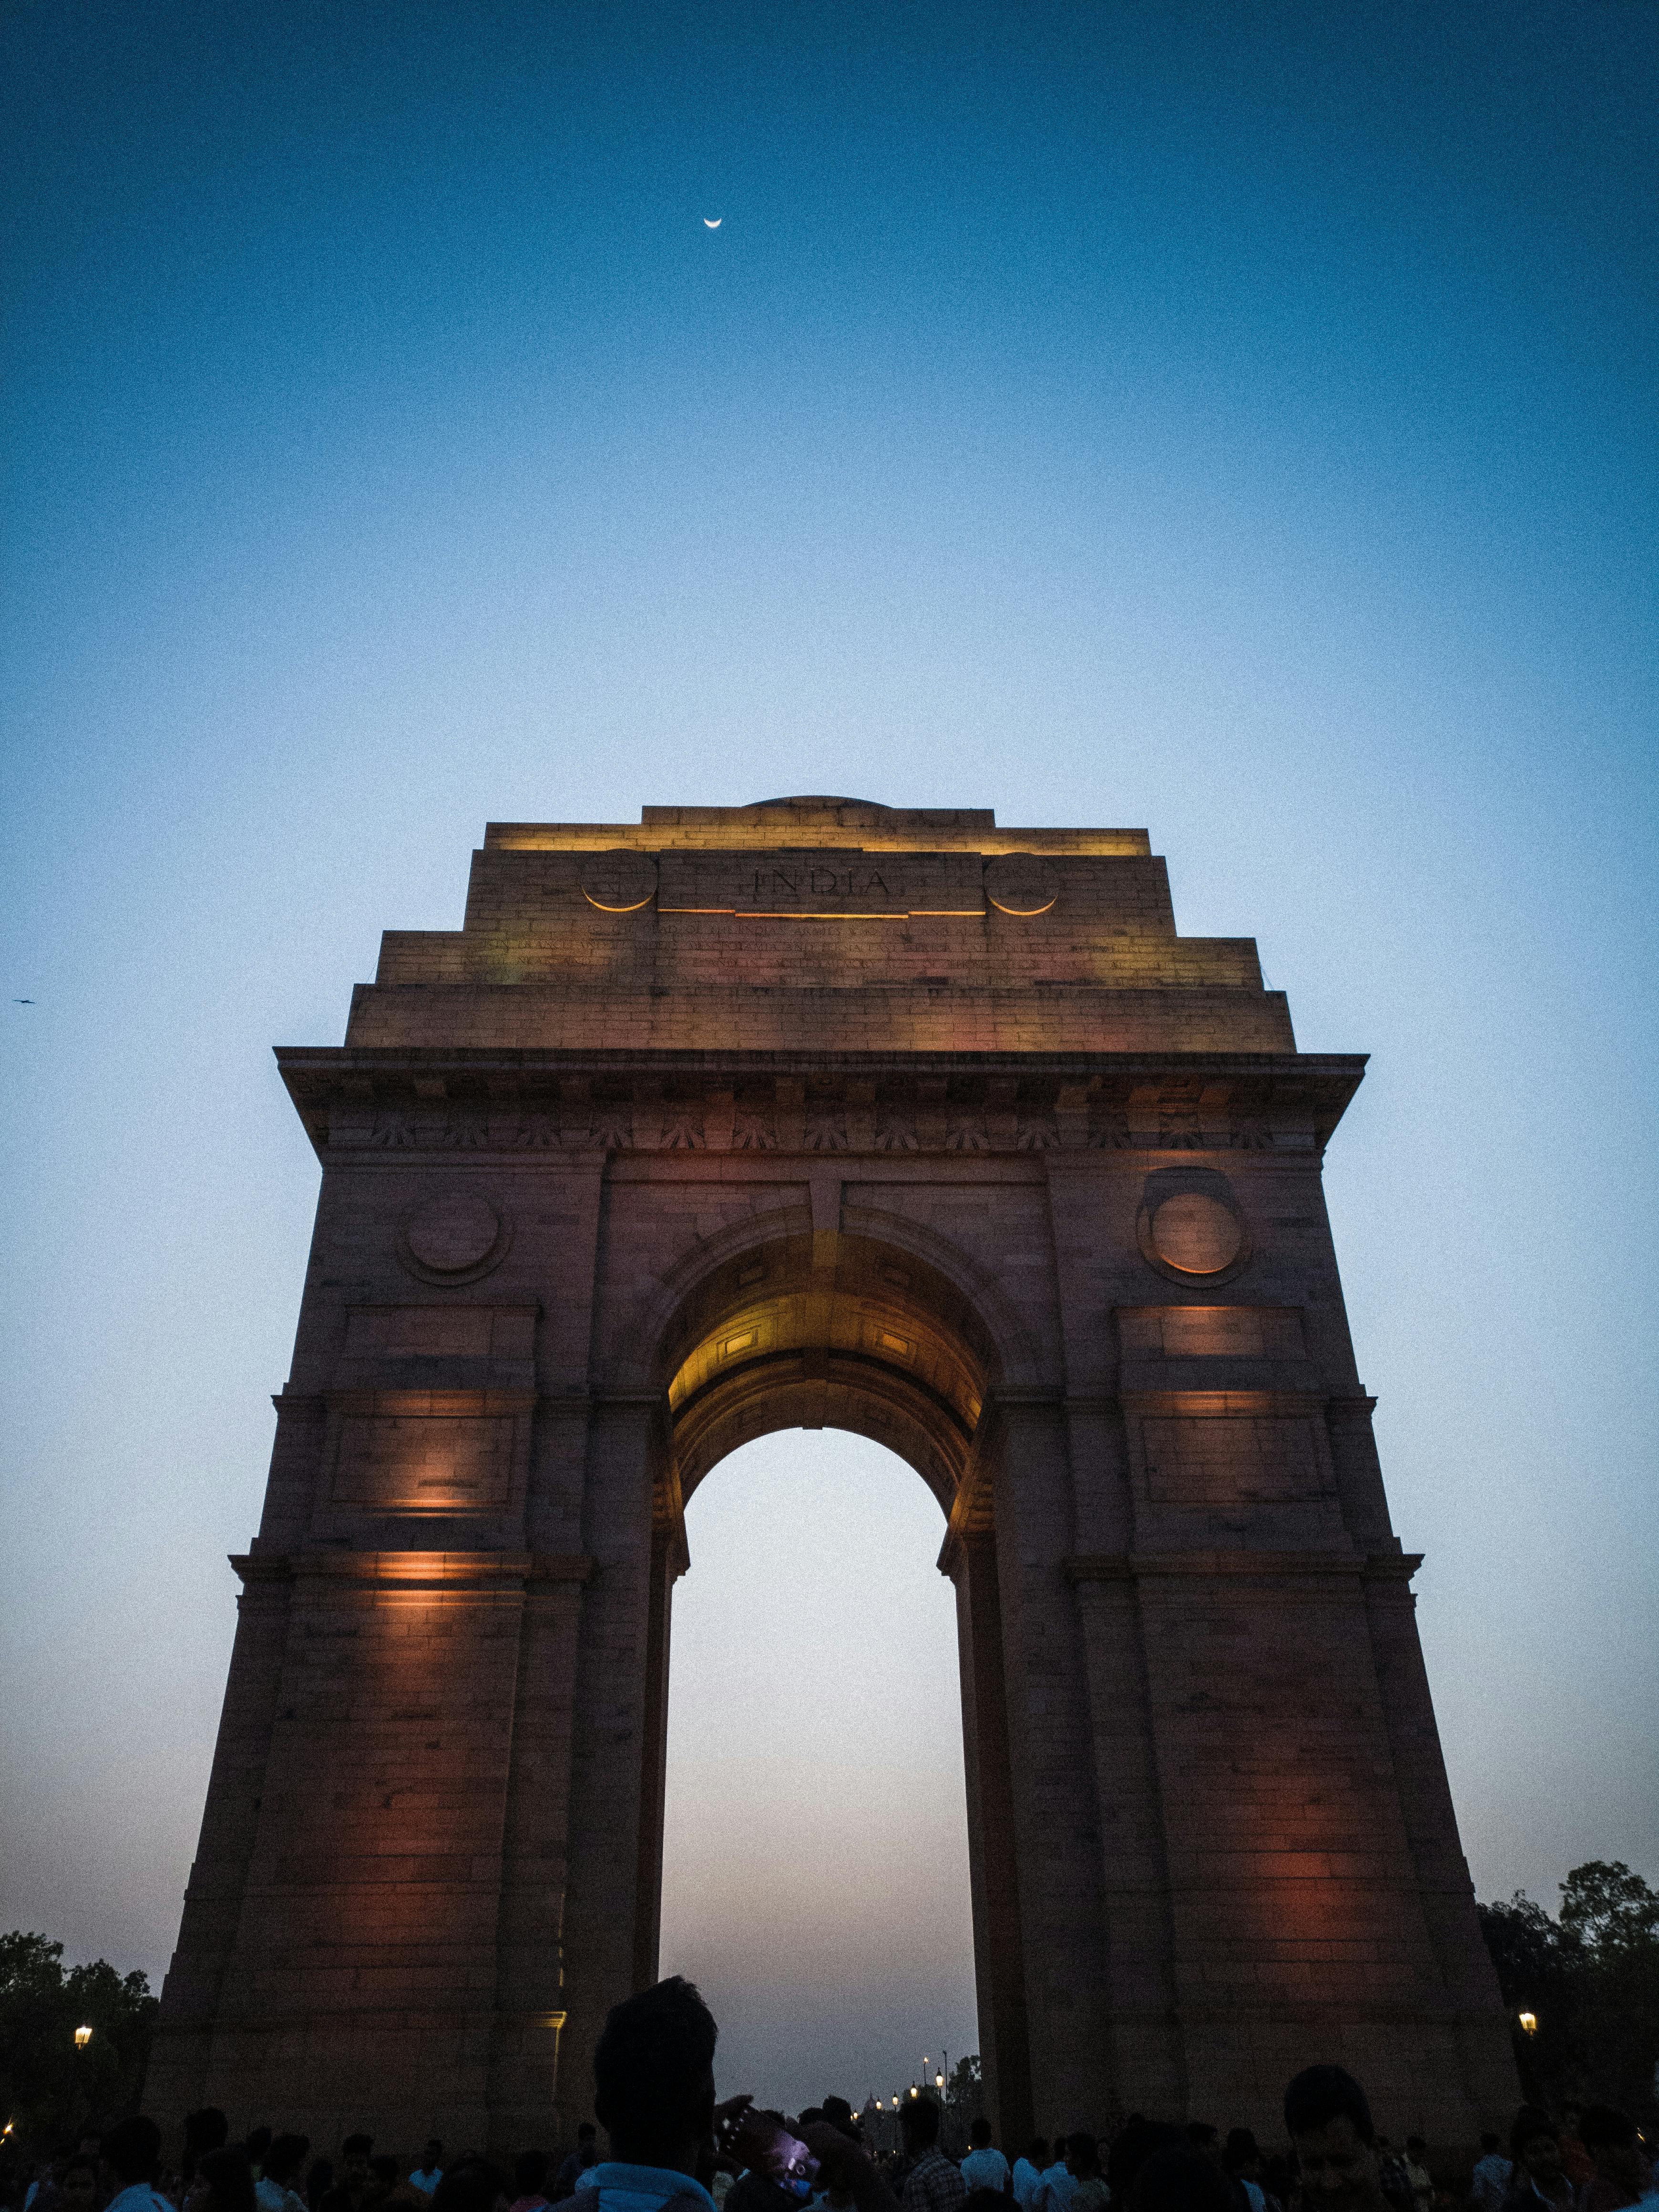 The Cartier-Bressons of India Gate | Mint